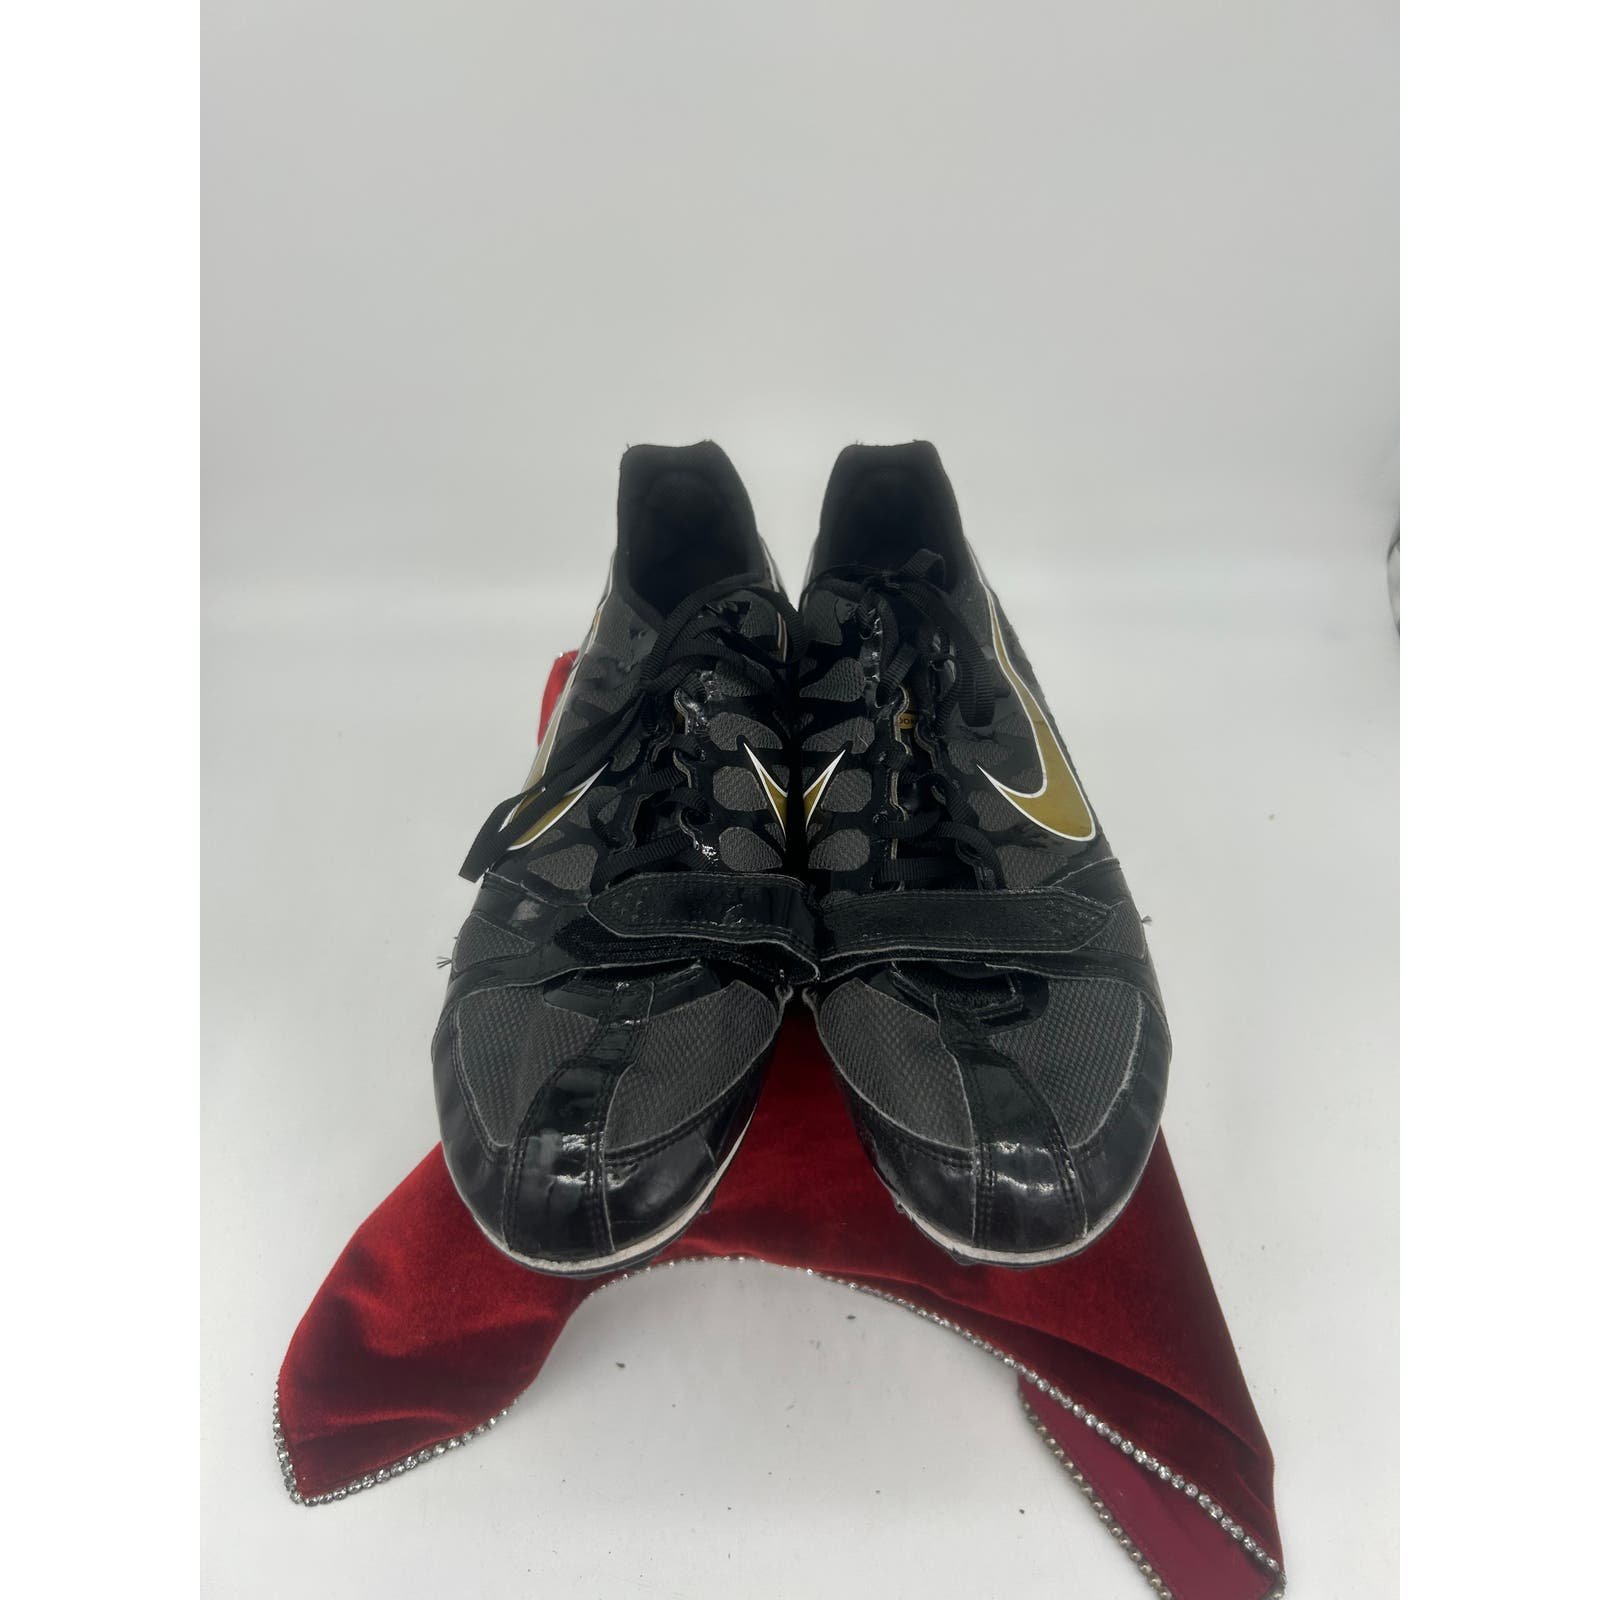 Nike Zoom Rival S 6 Men´s Track Sprint Shoes - Size 12.5 - 456812-071 Black Gold ieAwci6IE